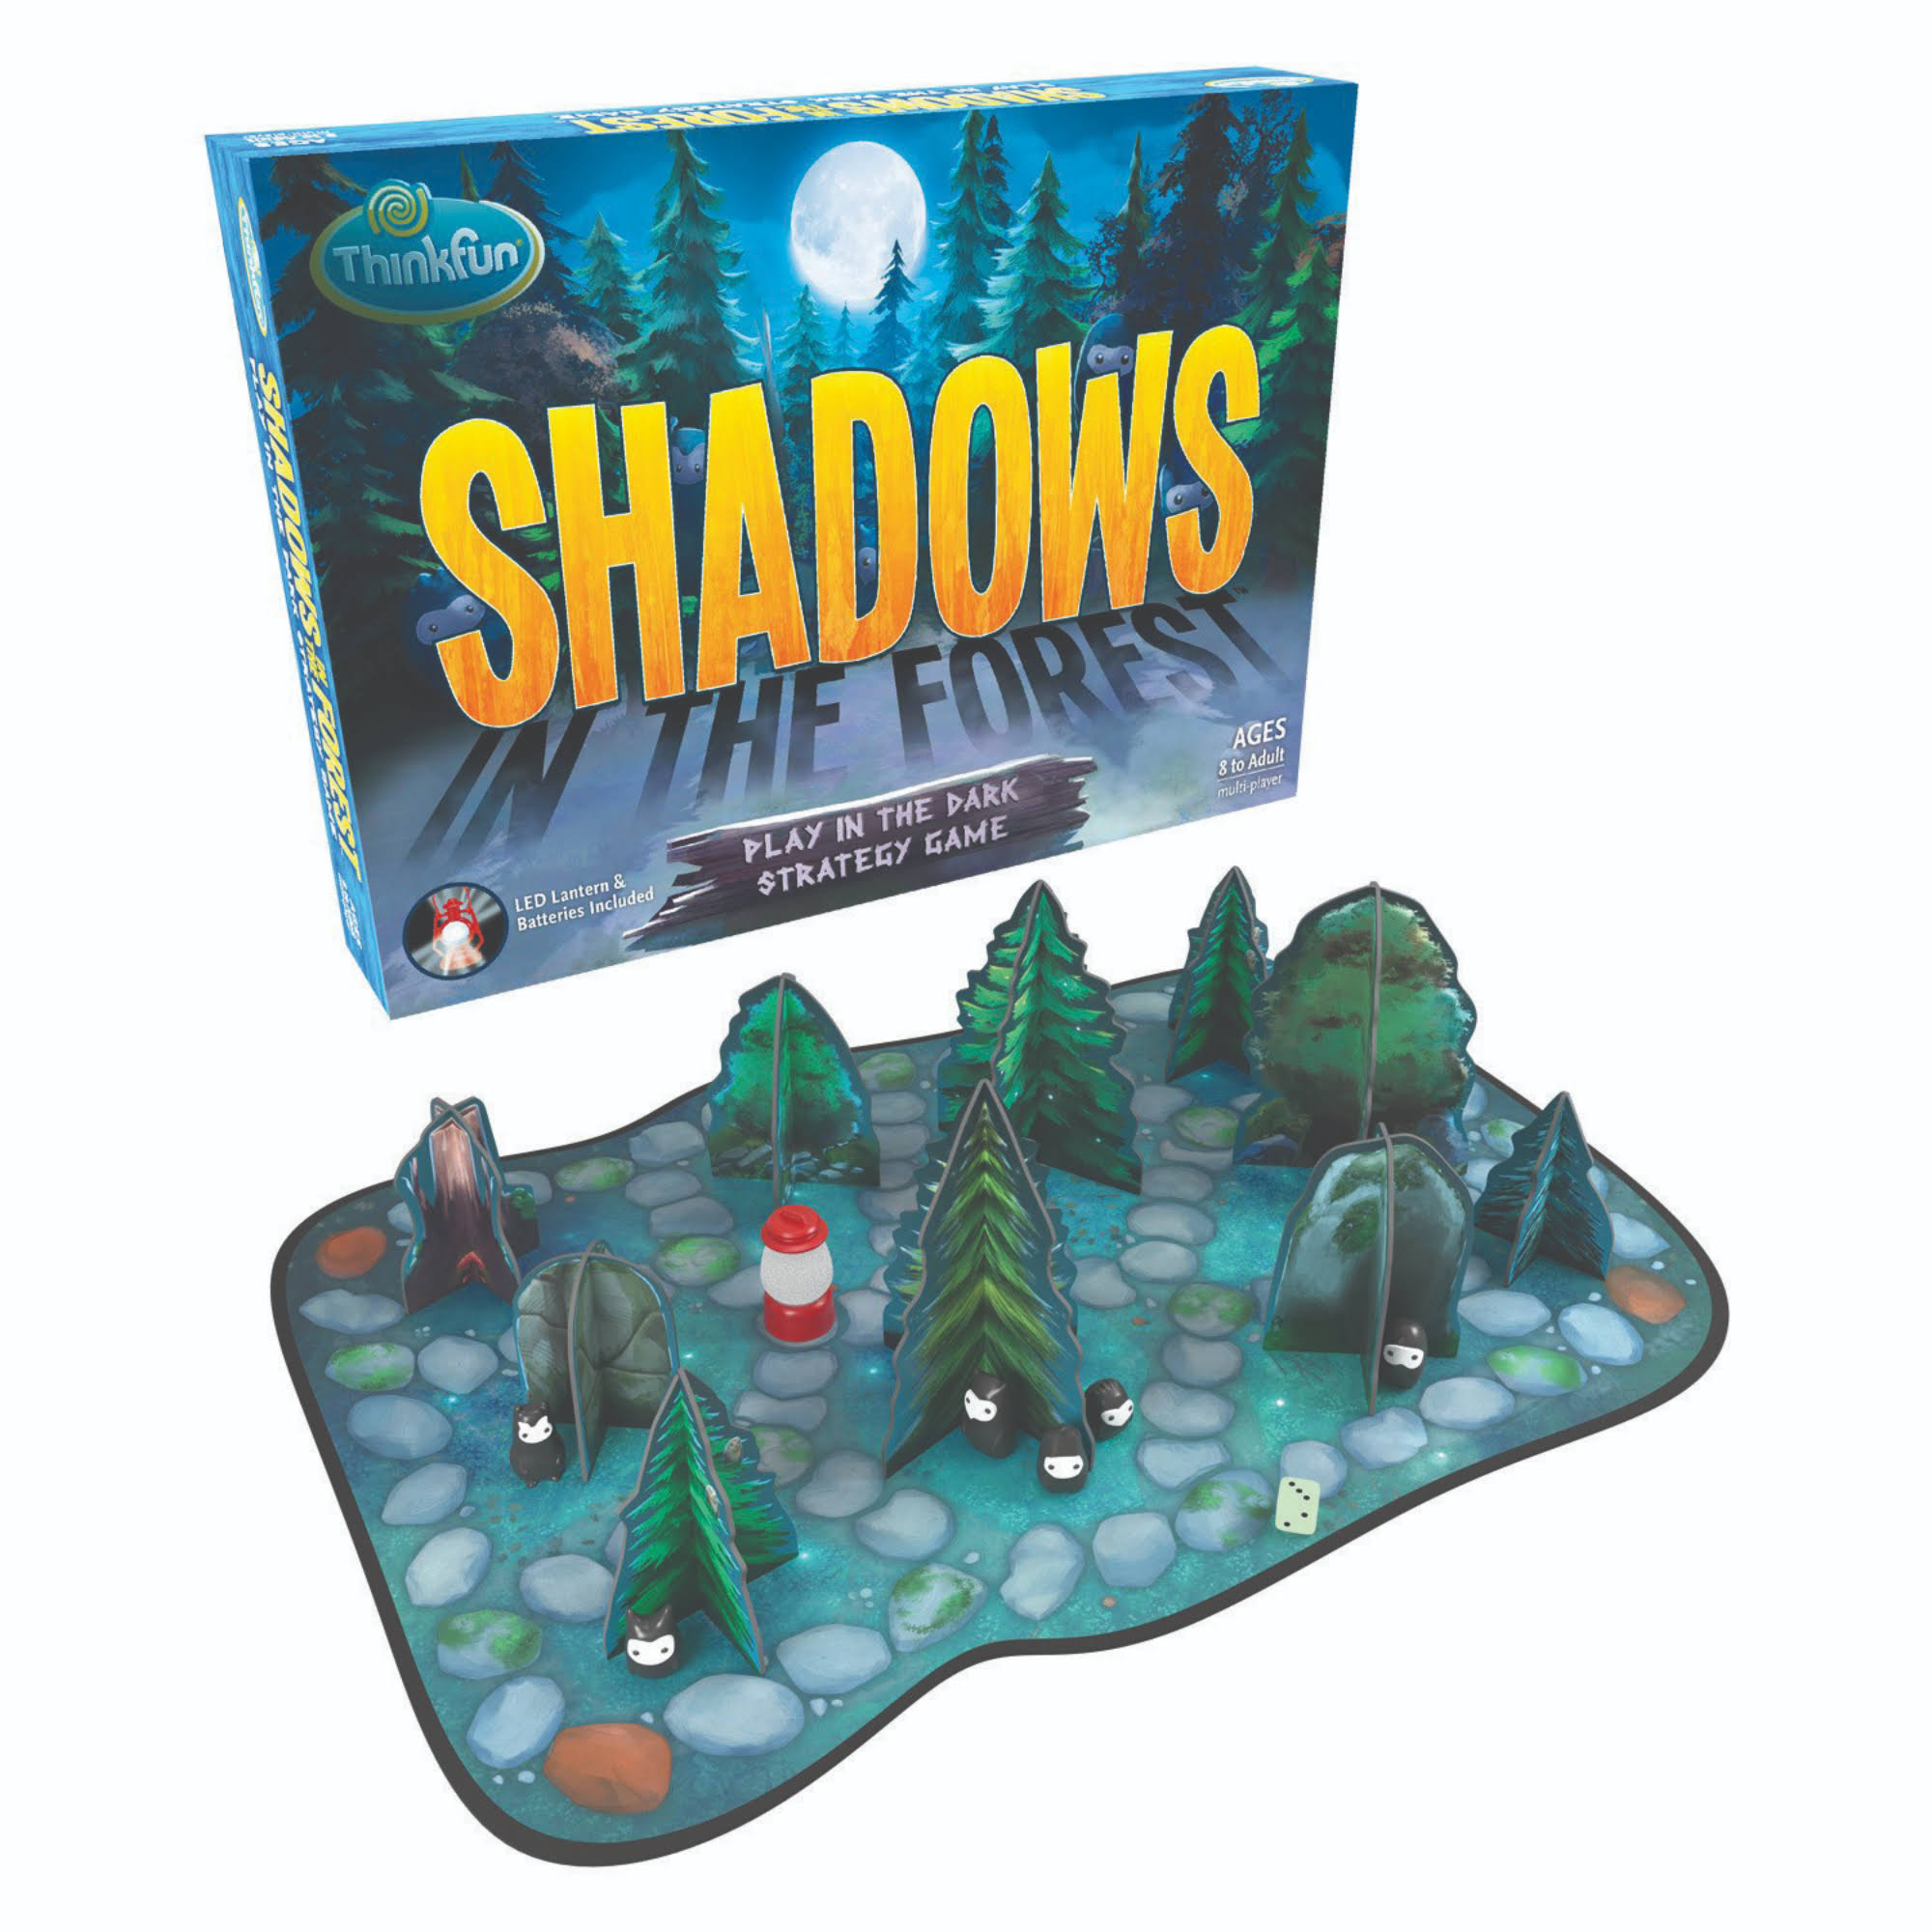 Thinkfun Shadows in The Forest Play in The Dark Board Game Strategy